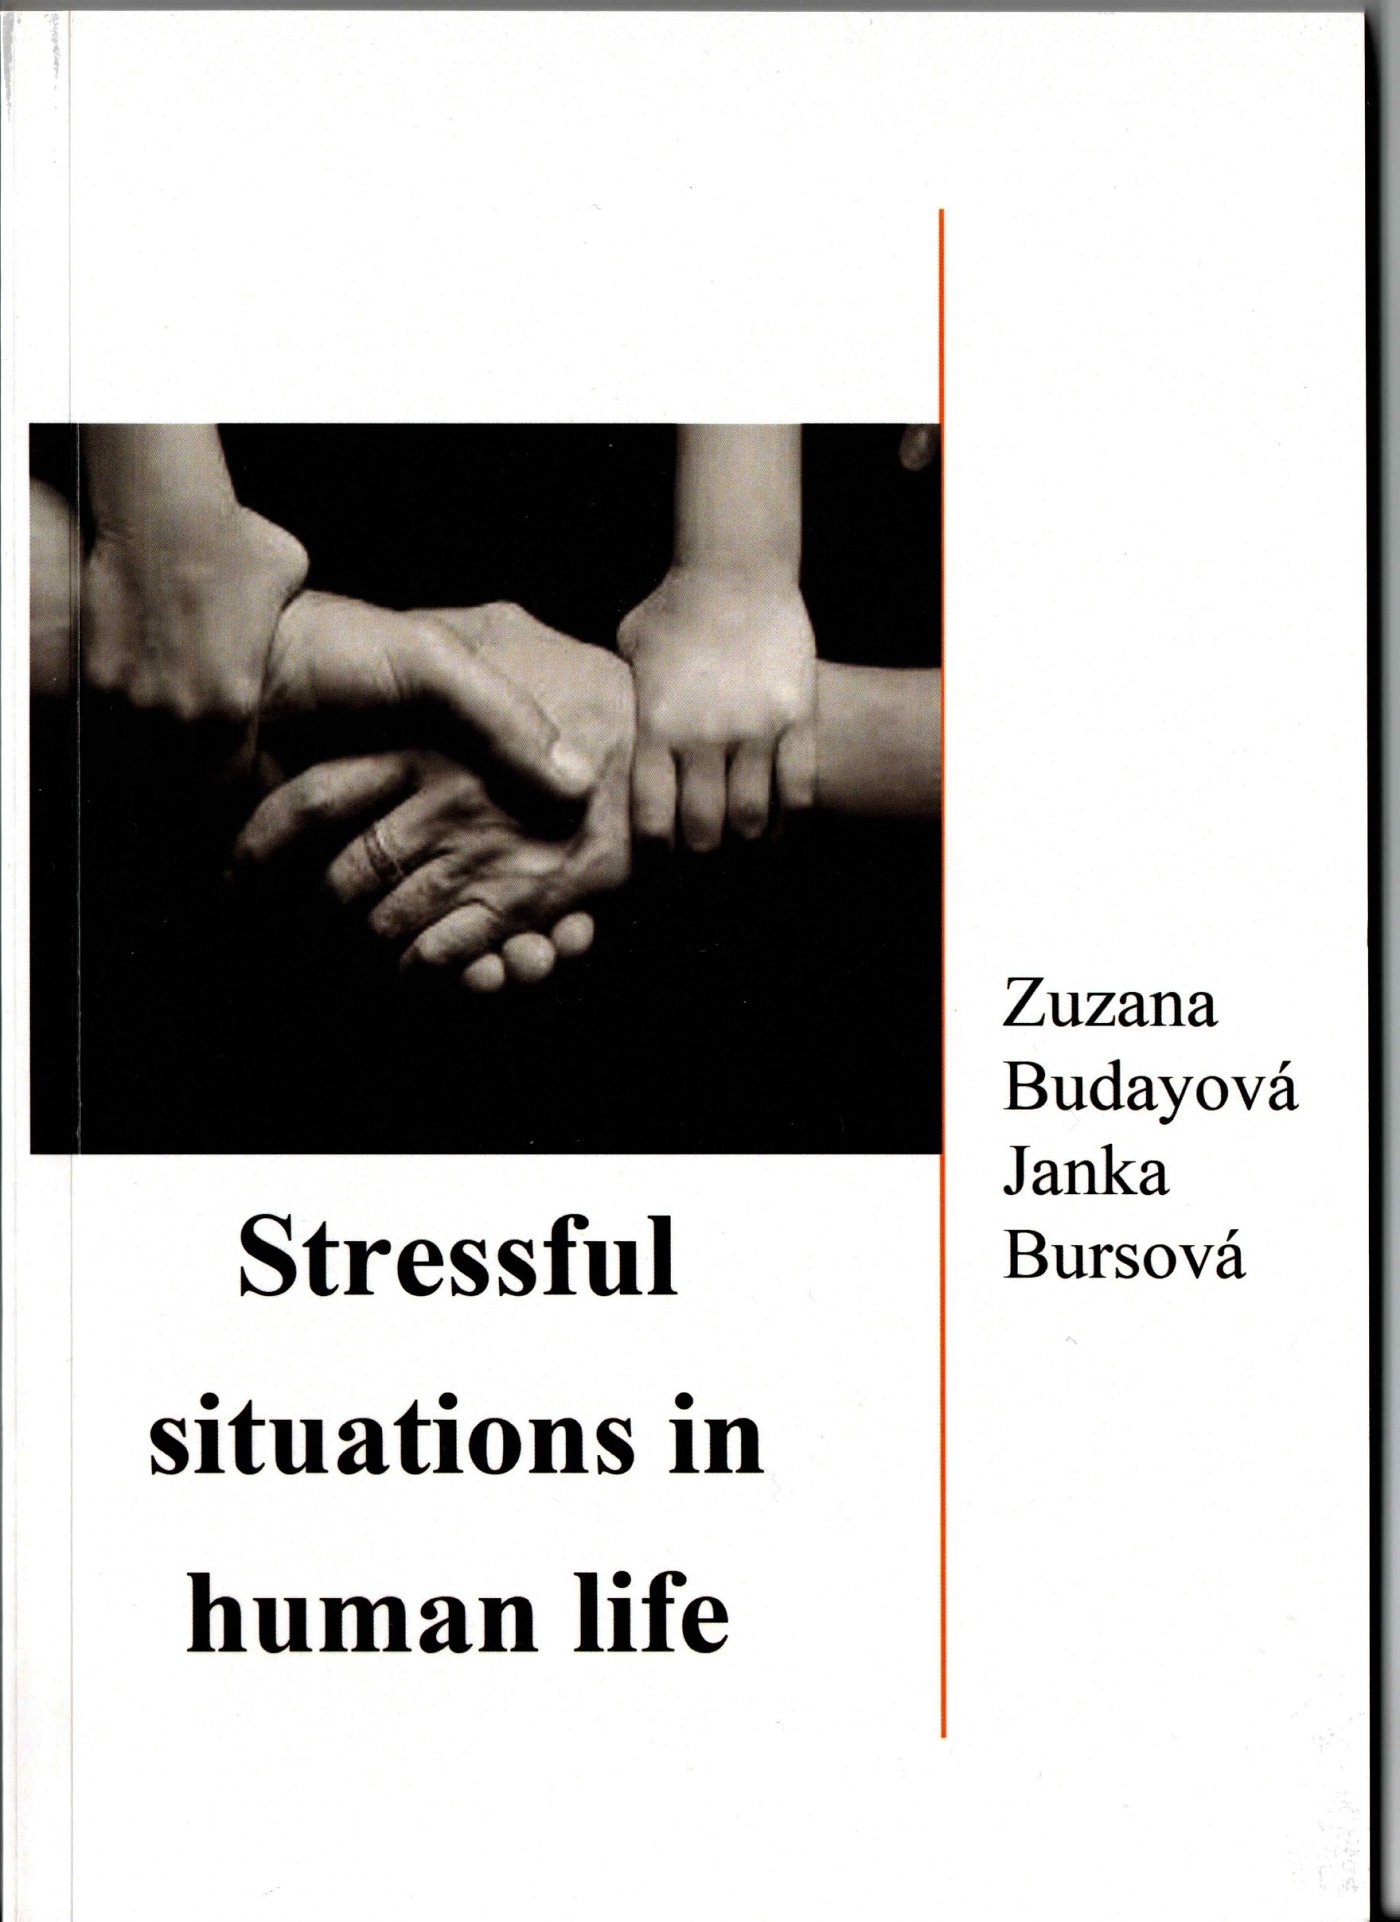 Stressful situations in human life